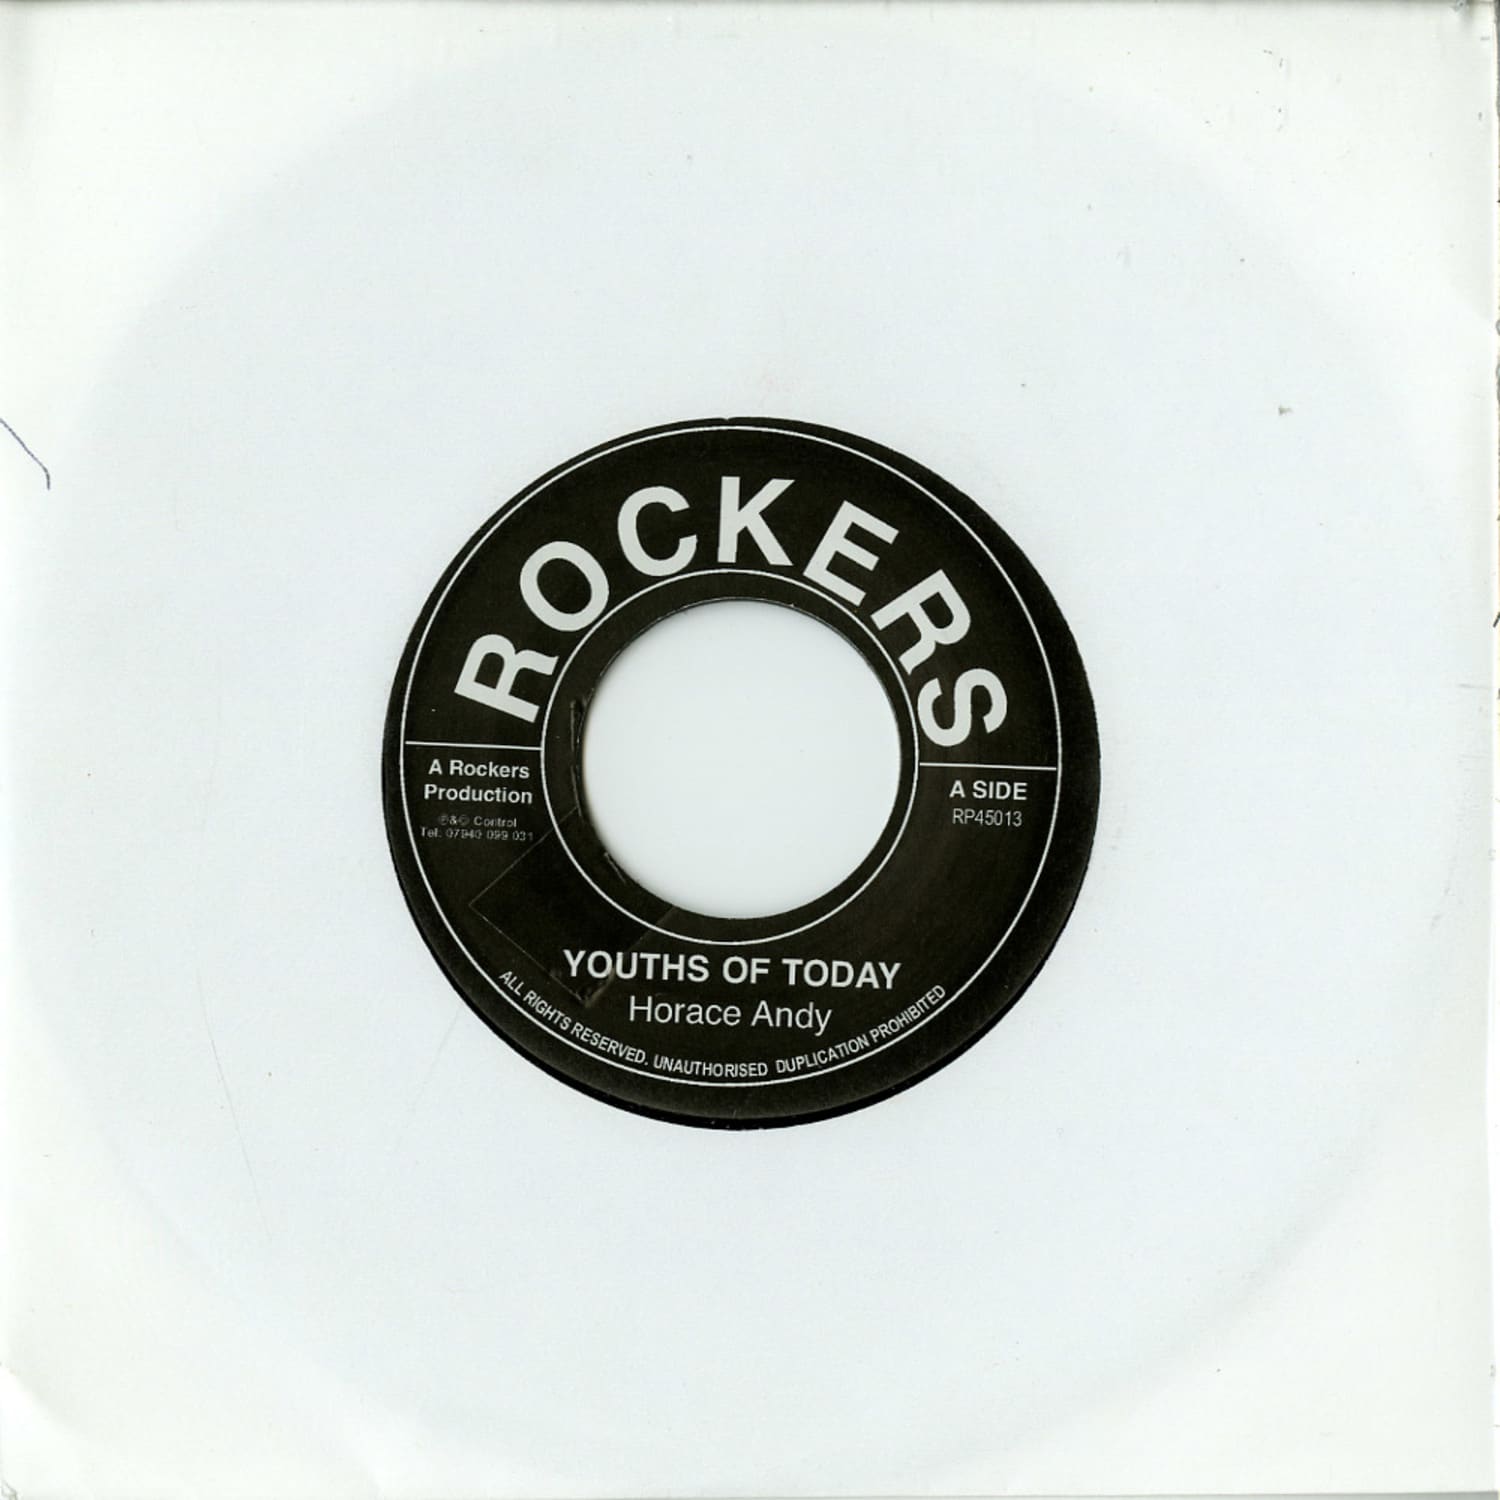 Horace Andy / Rockers All Stars - YOUTHS OF TODAY / ROCKERS YOUTH 